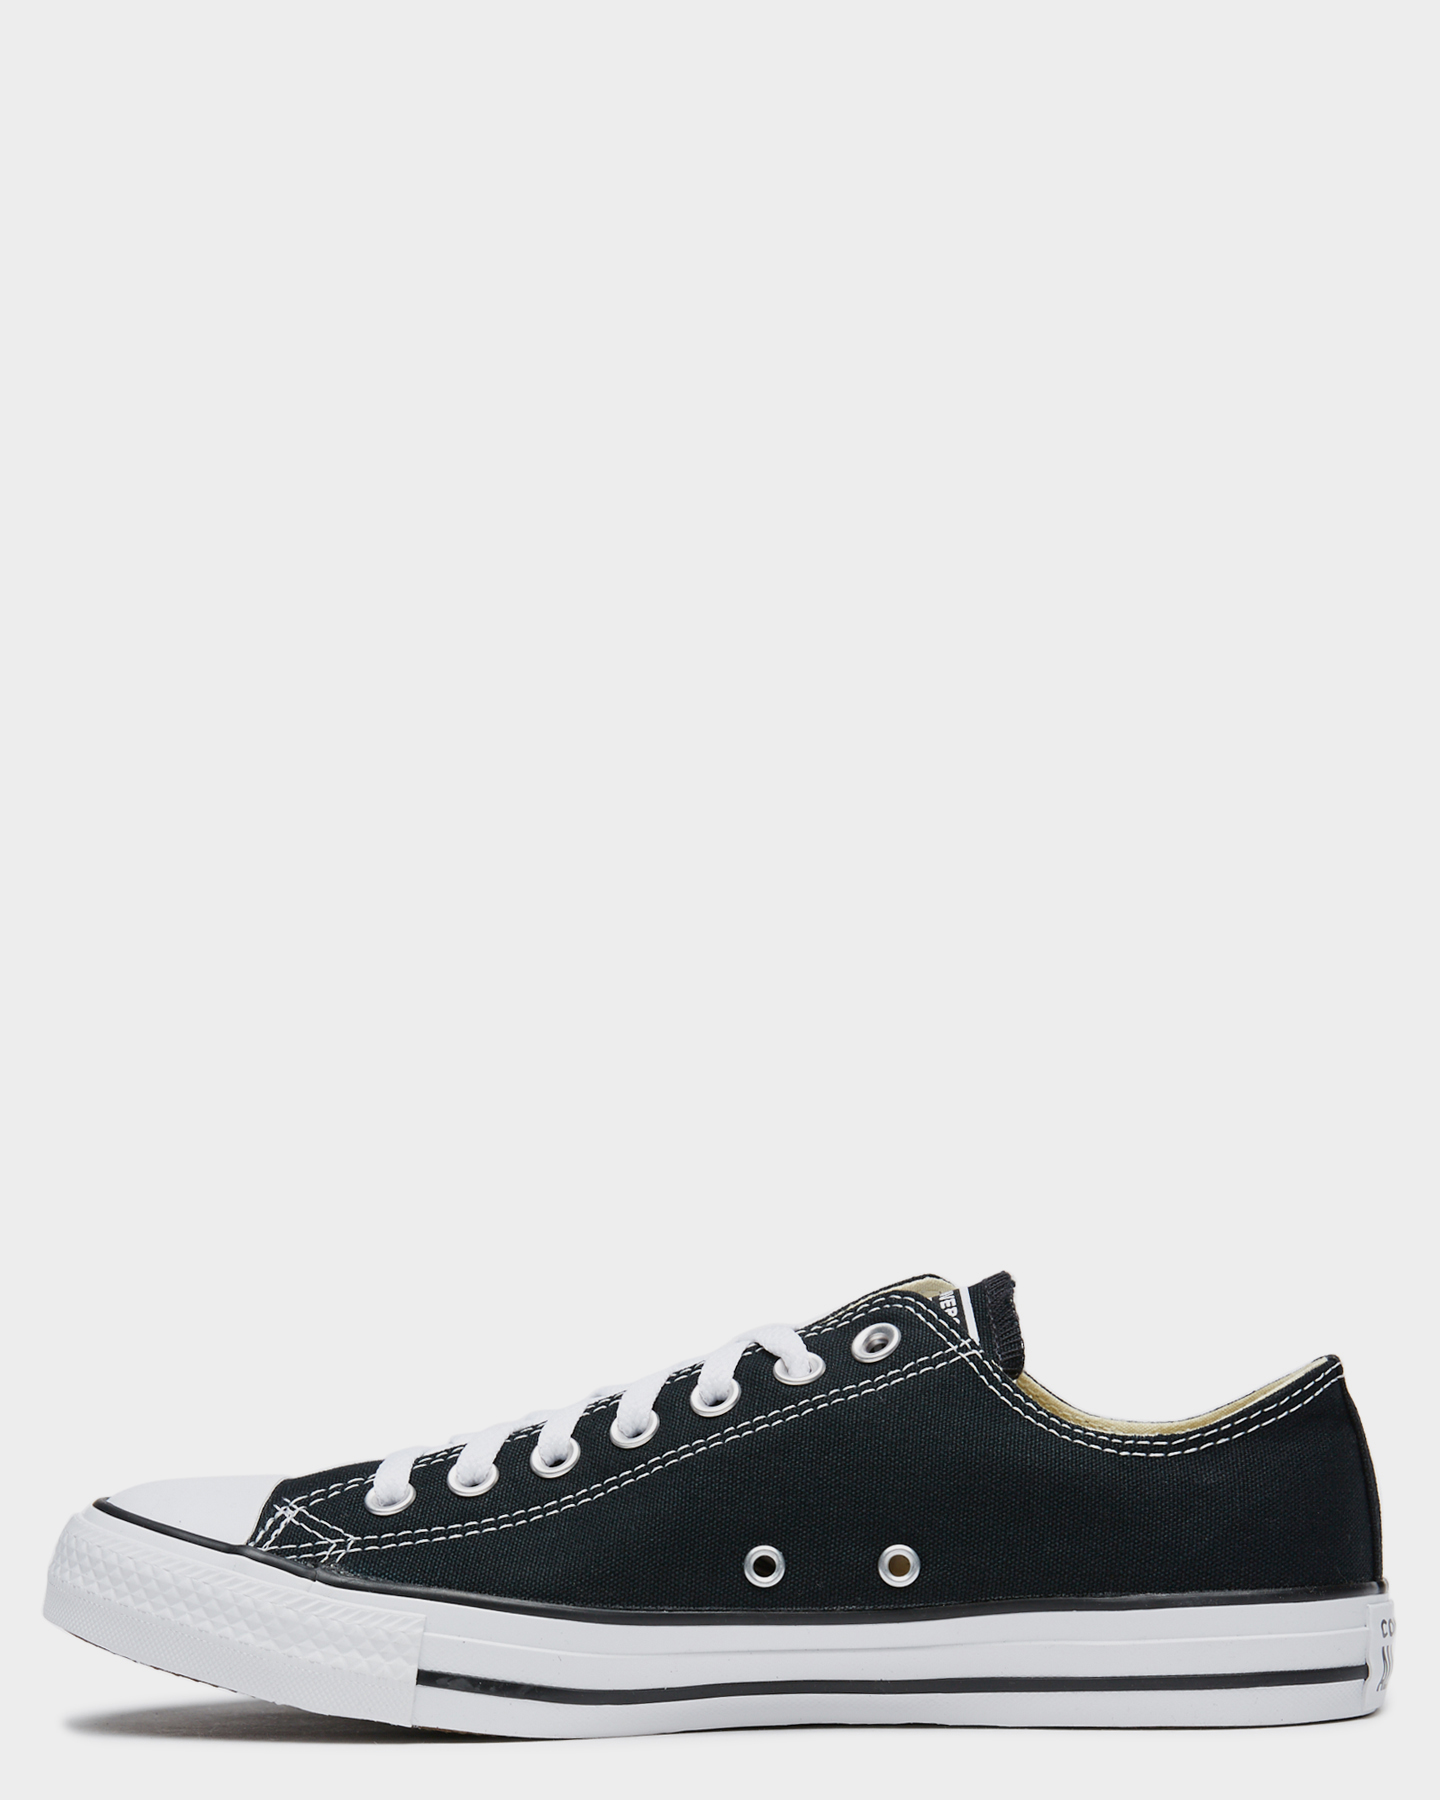 Converse Chuck Taylor All Star Lo Shoe - Black | SurfStitch